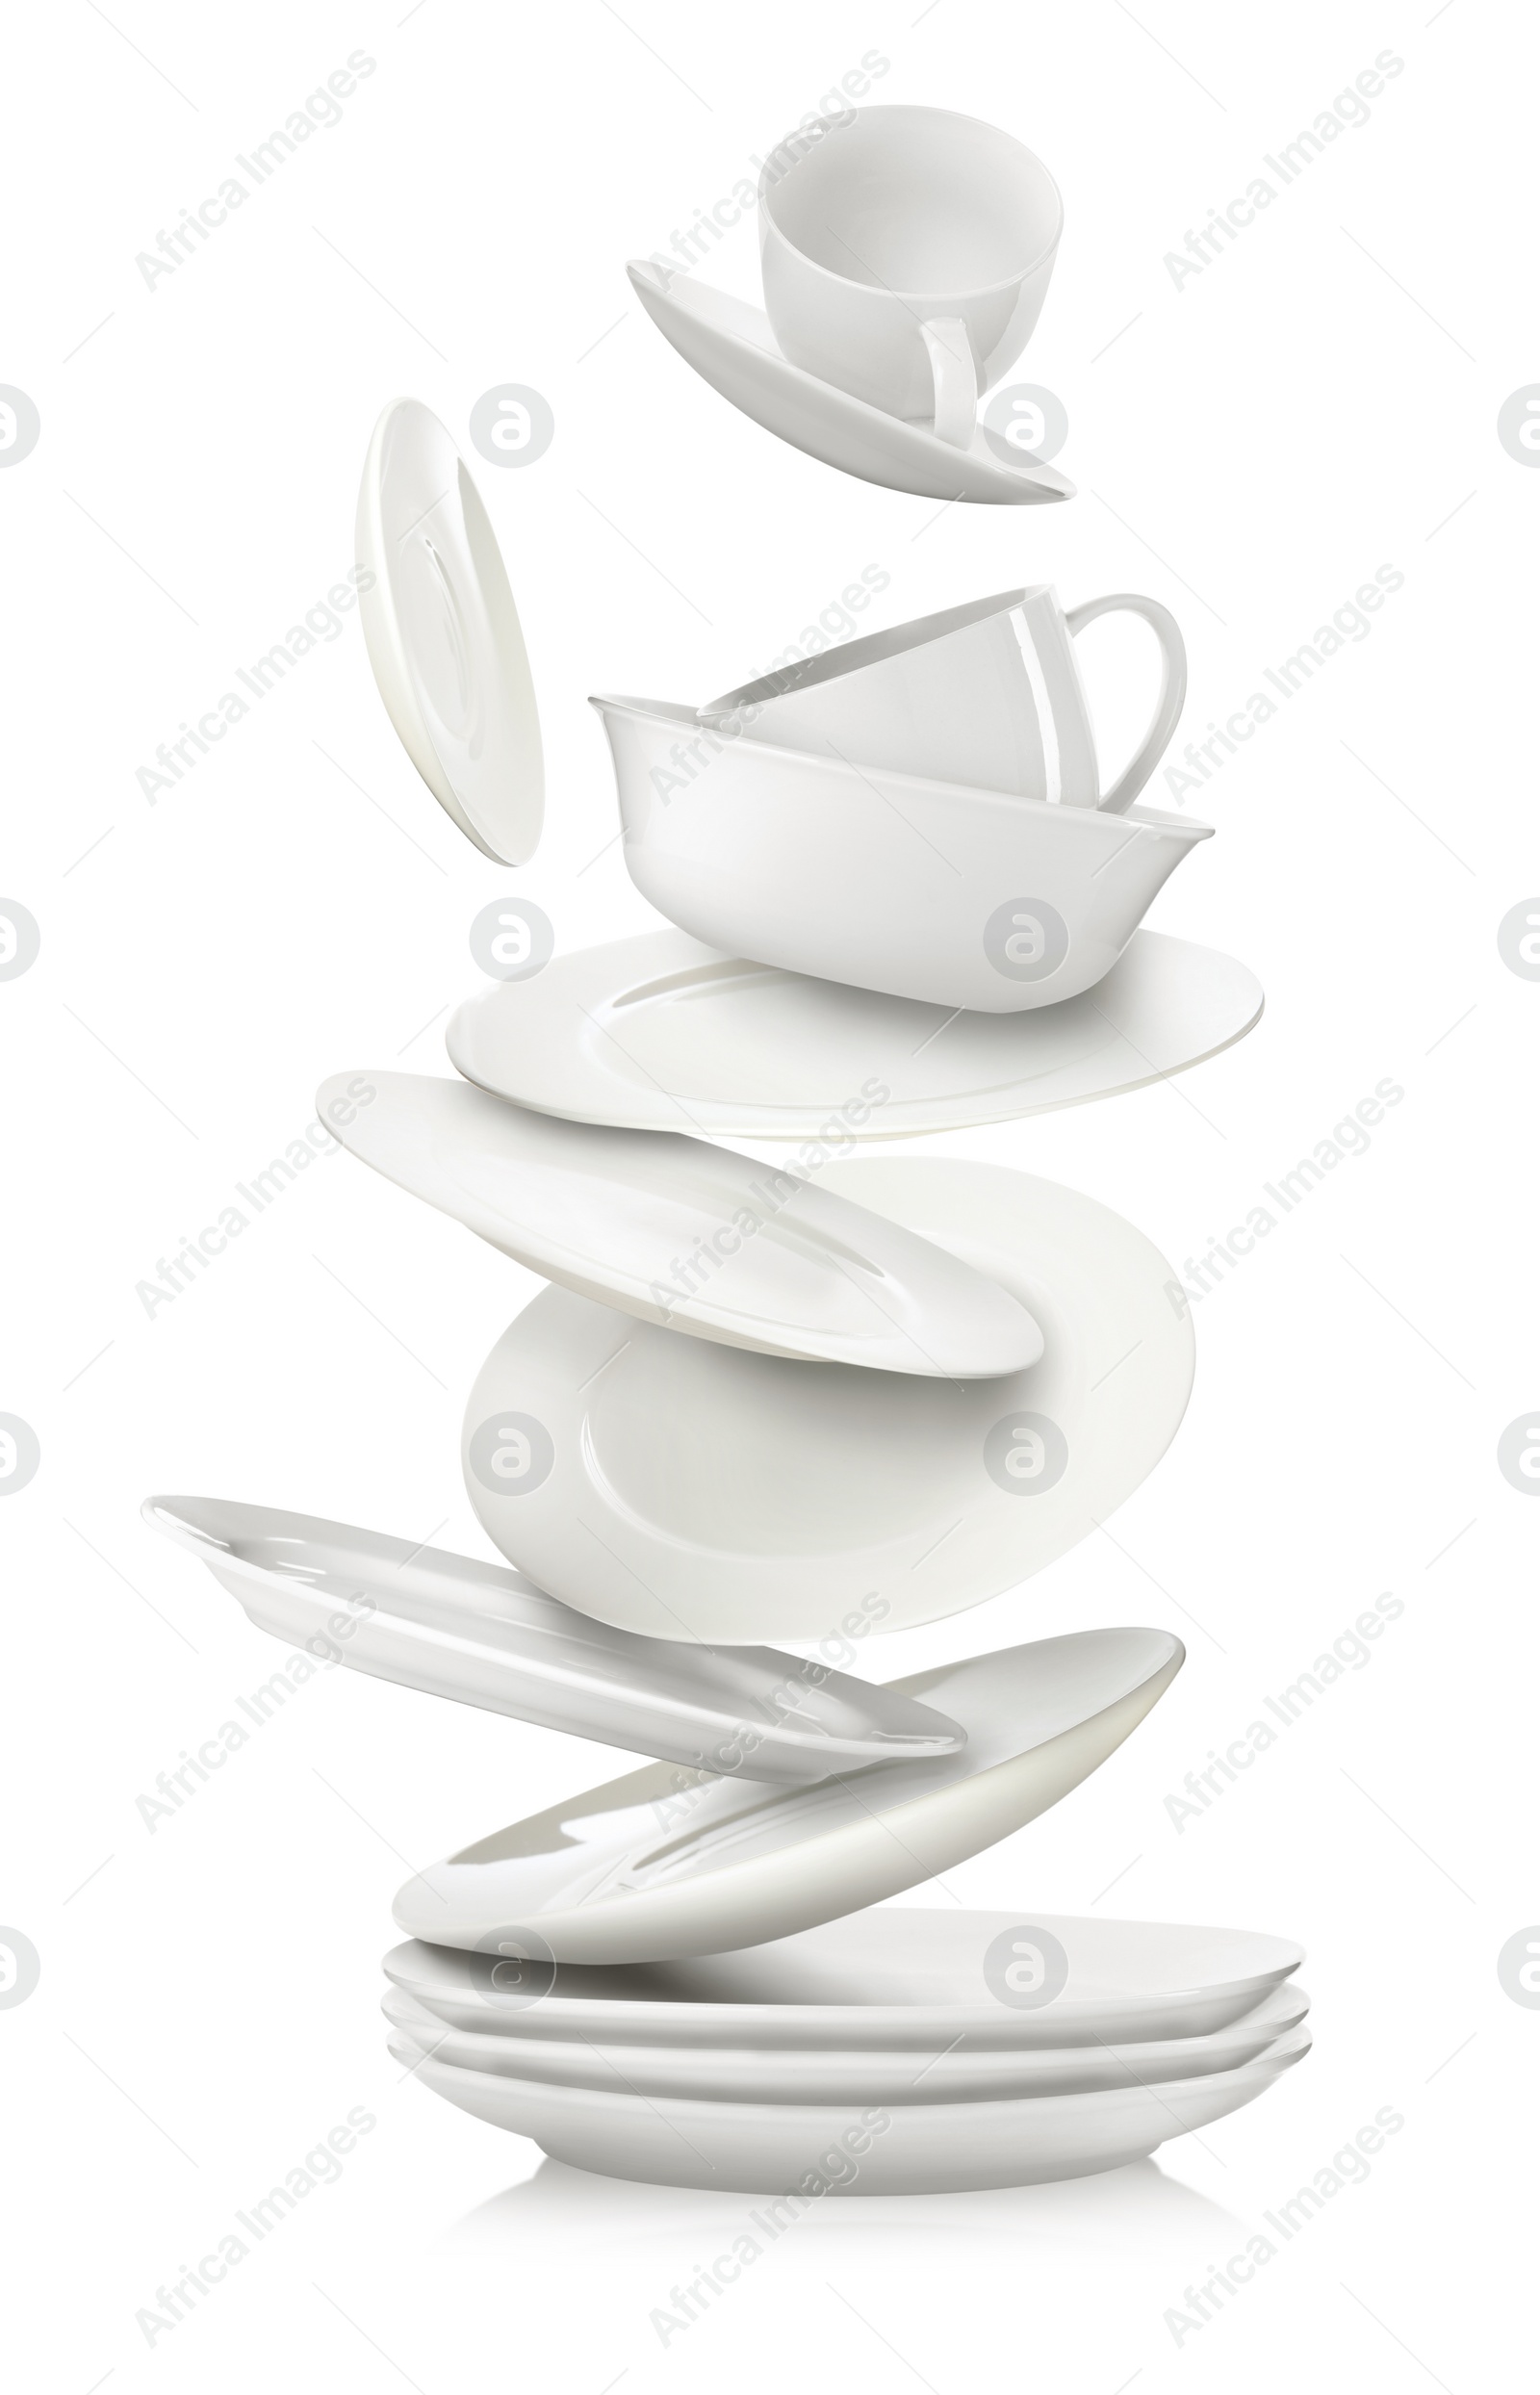 Image of Set of clean dishes and cups in flight on white background